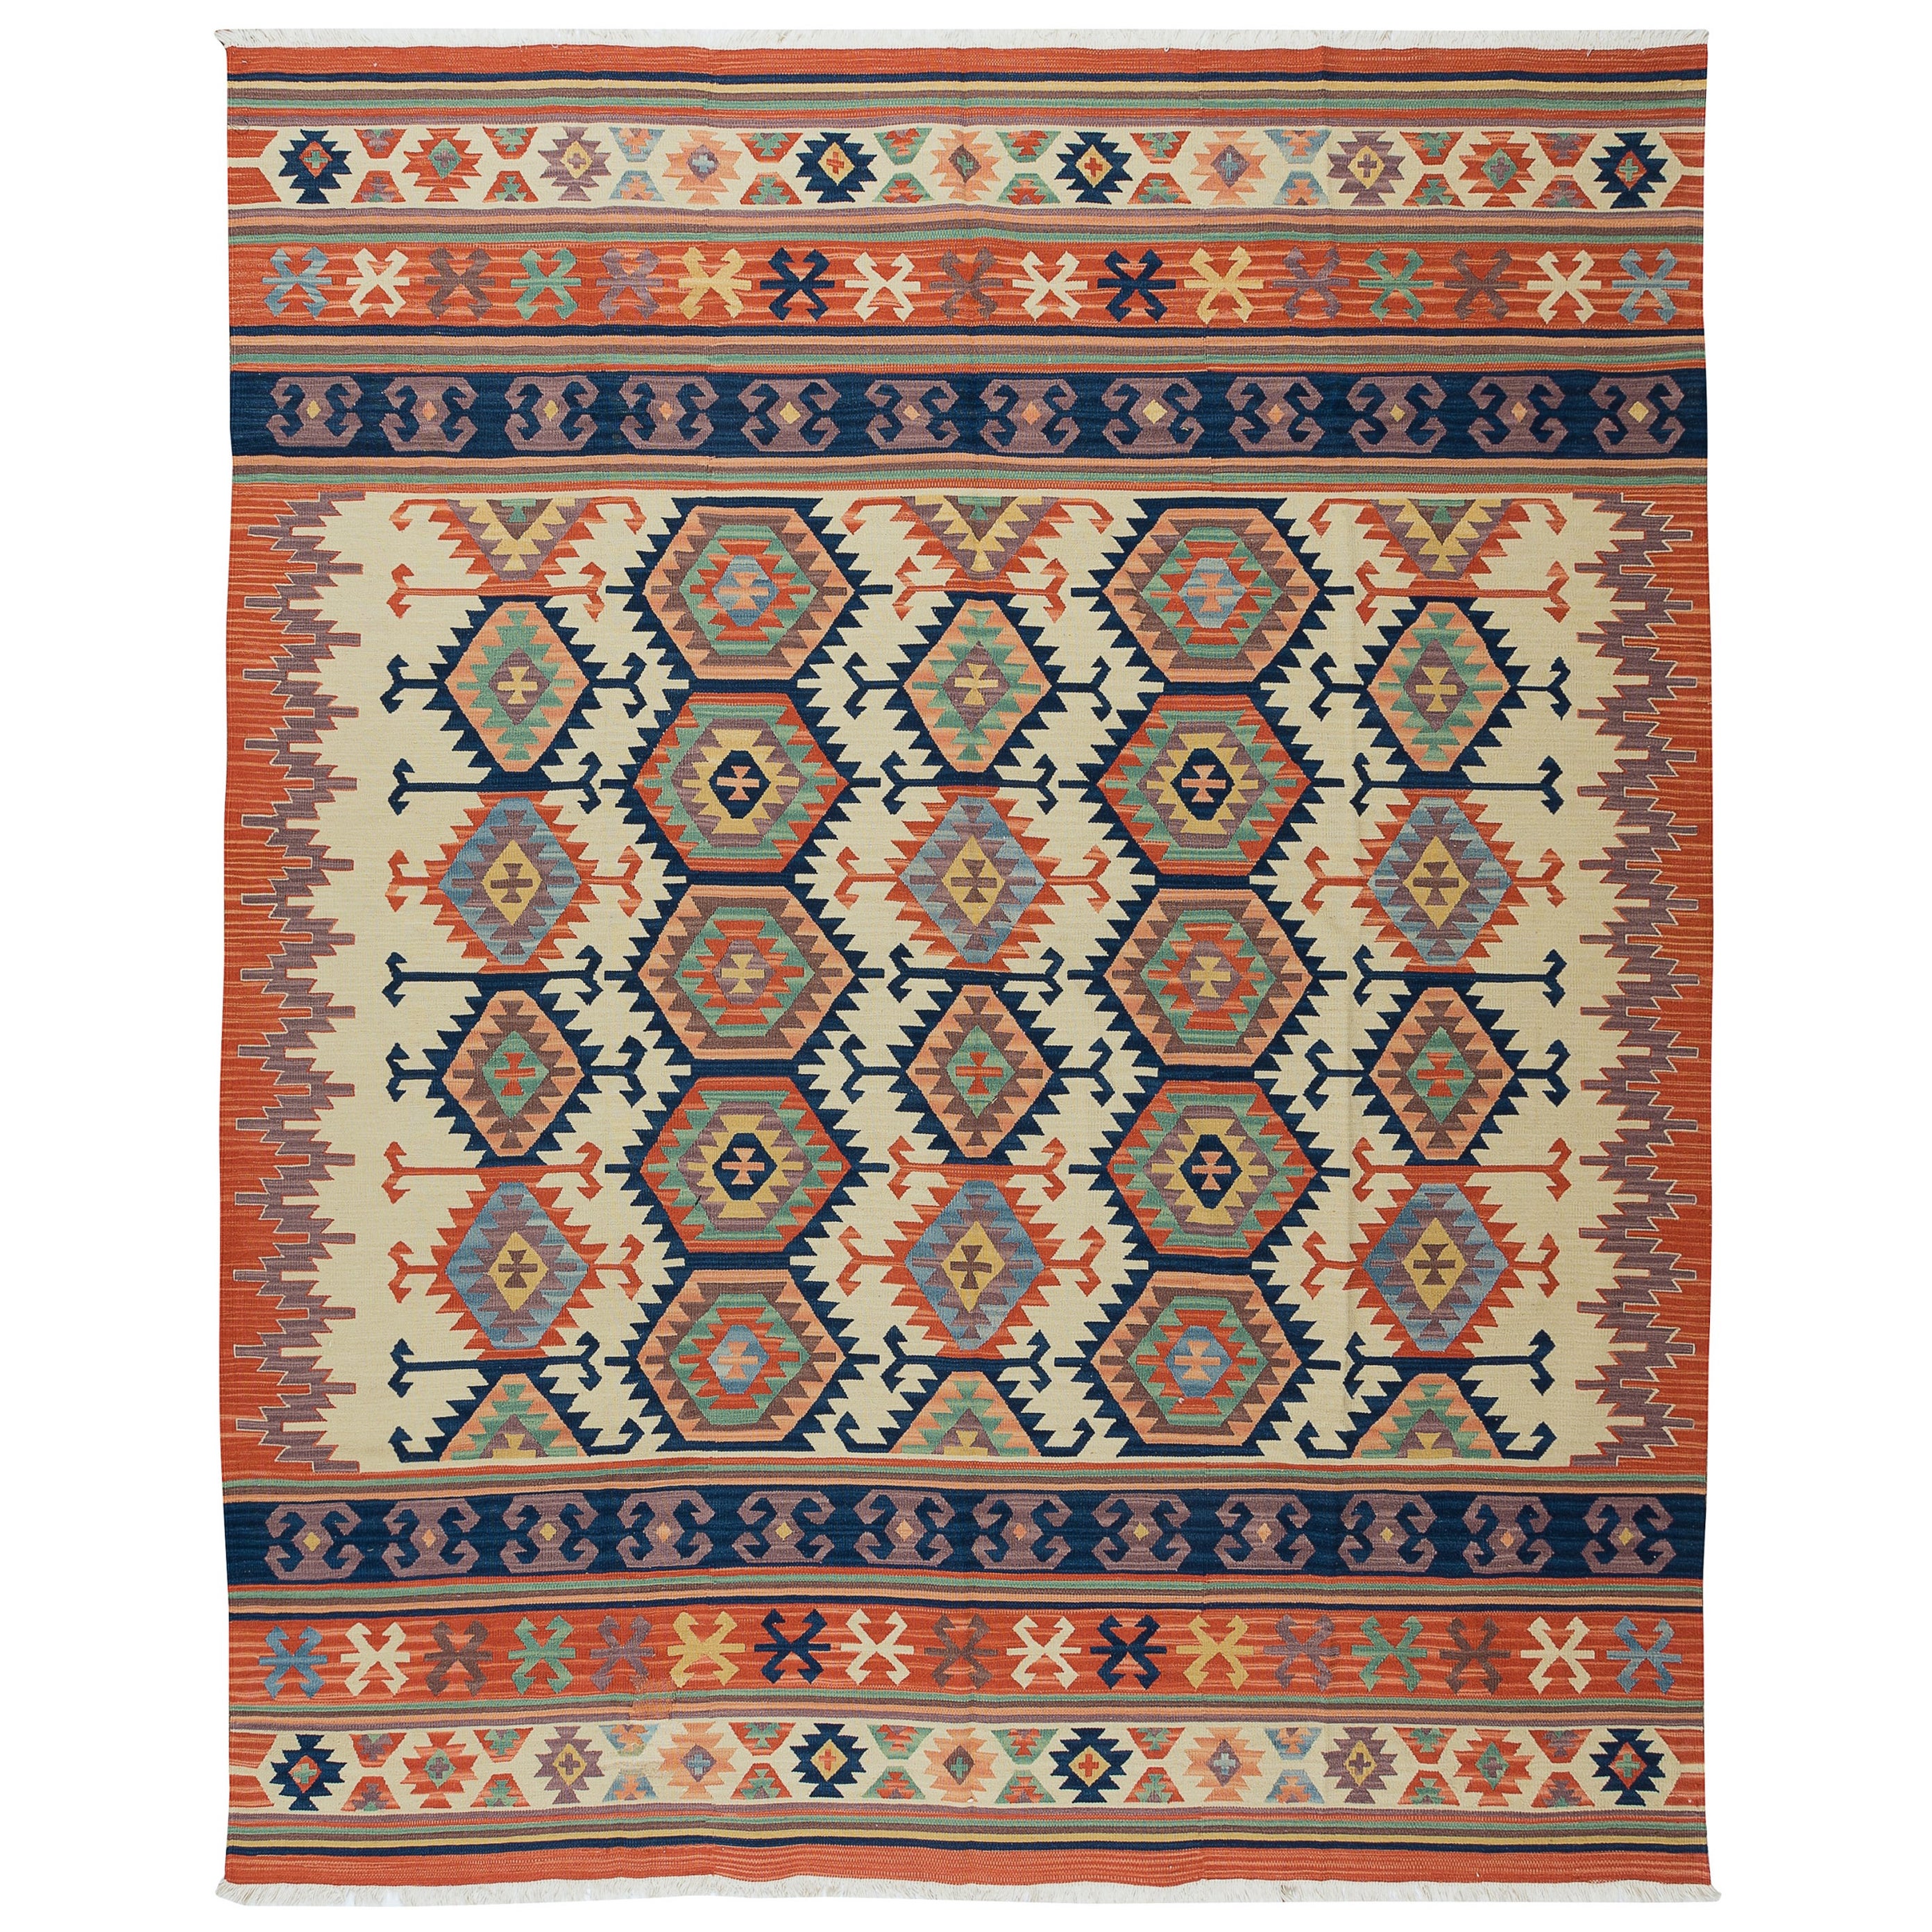 6.4x7.8 Ft One of a Kind Vintage Hand-Woven Turkish Kilim 'Flat-Weave', All Wool For Sale